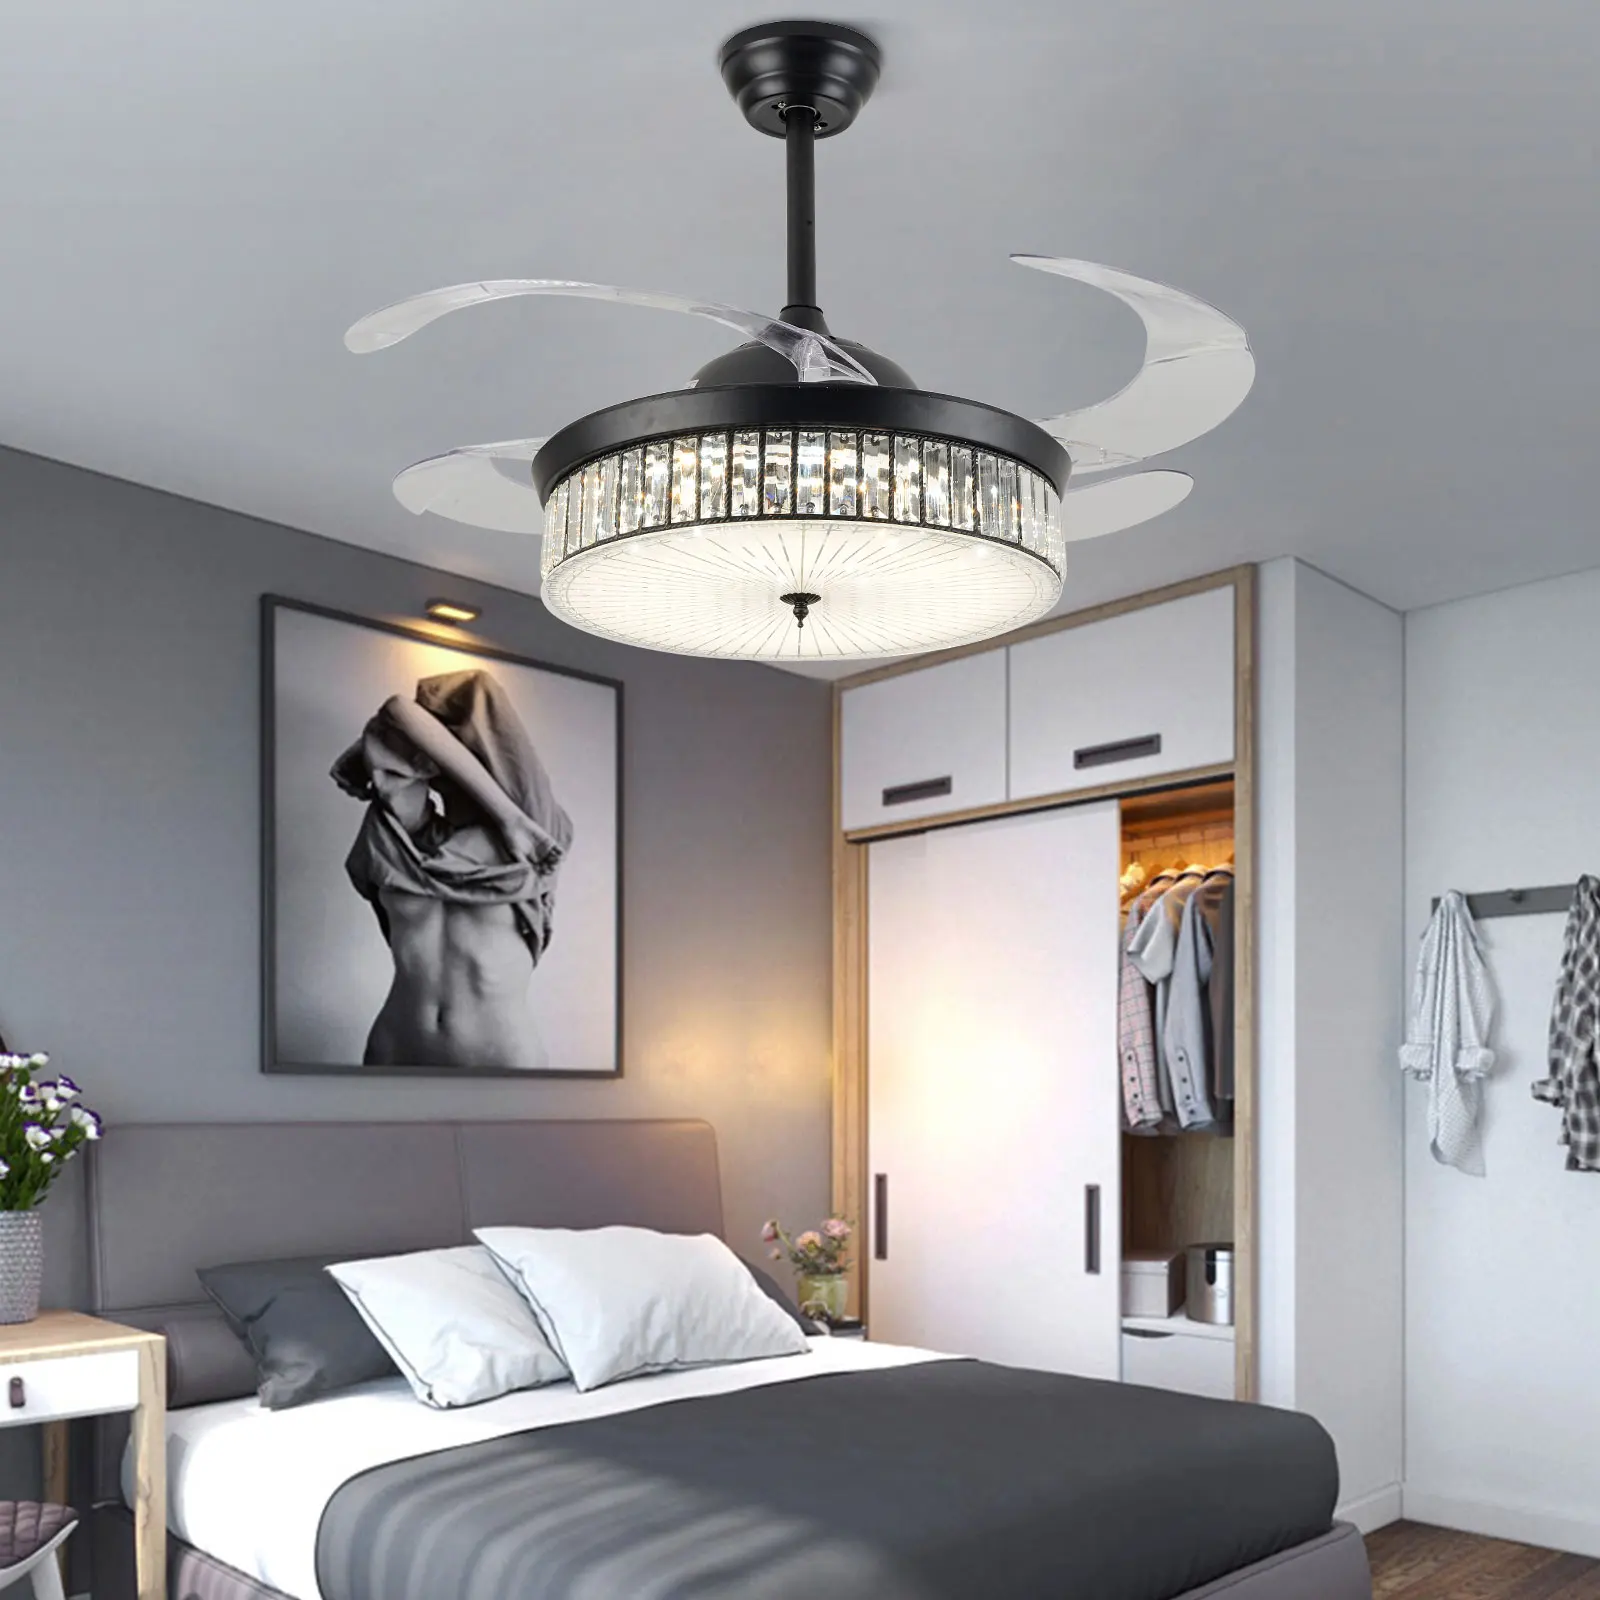 

42" Dimmable Crystal LED Chandelier Black 4 Retractable Blades Ceiling Fan Light W/ Remote Dining Living Bedroom Fixture